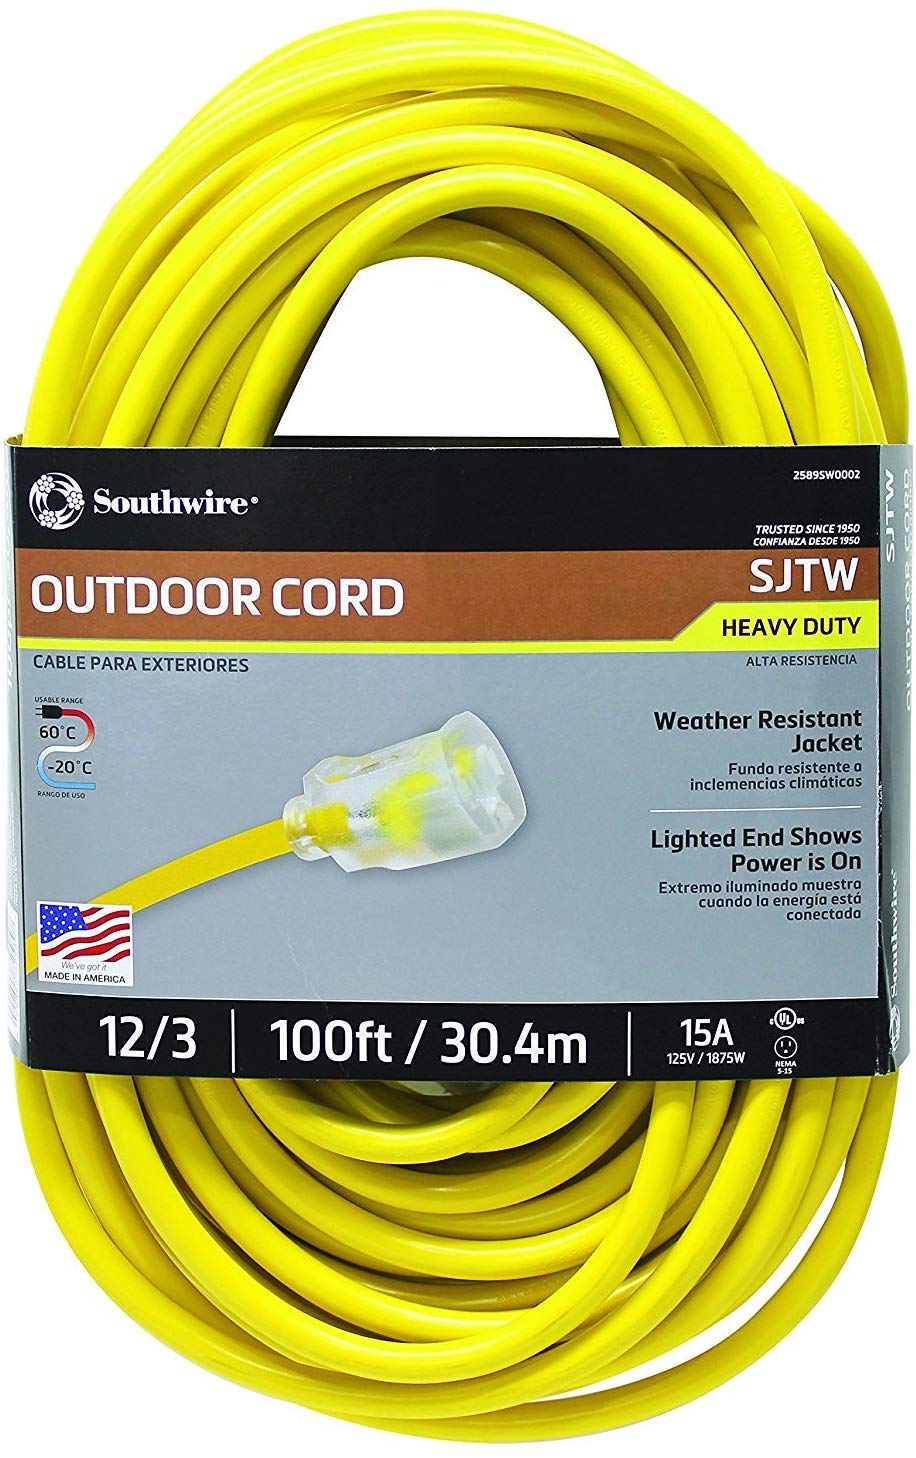 Qty.100 #02589 (100') 12/3 Extension Cords